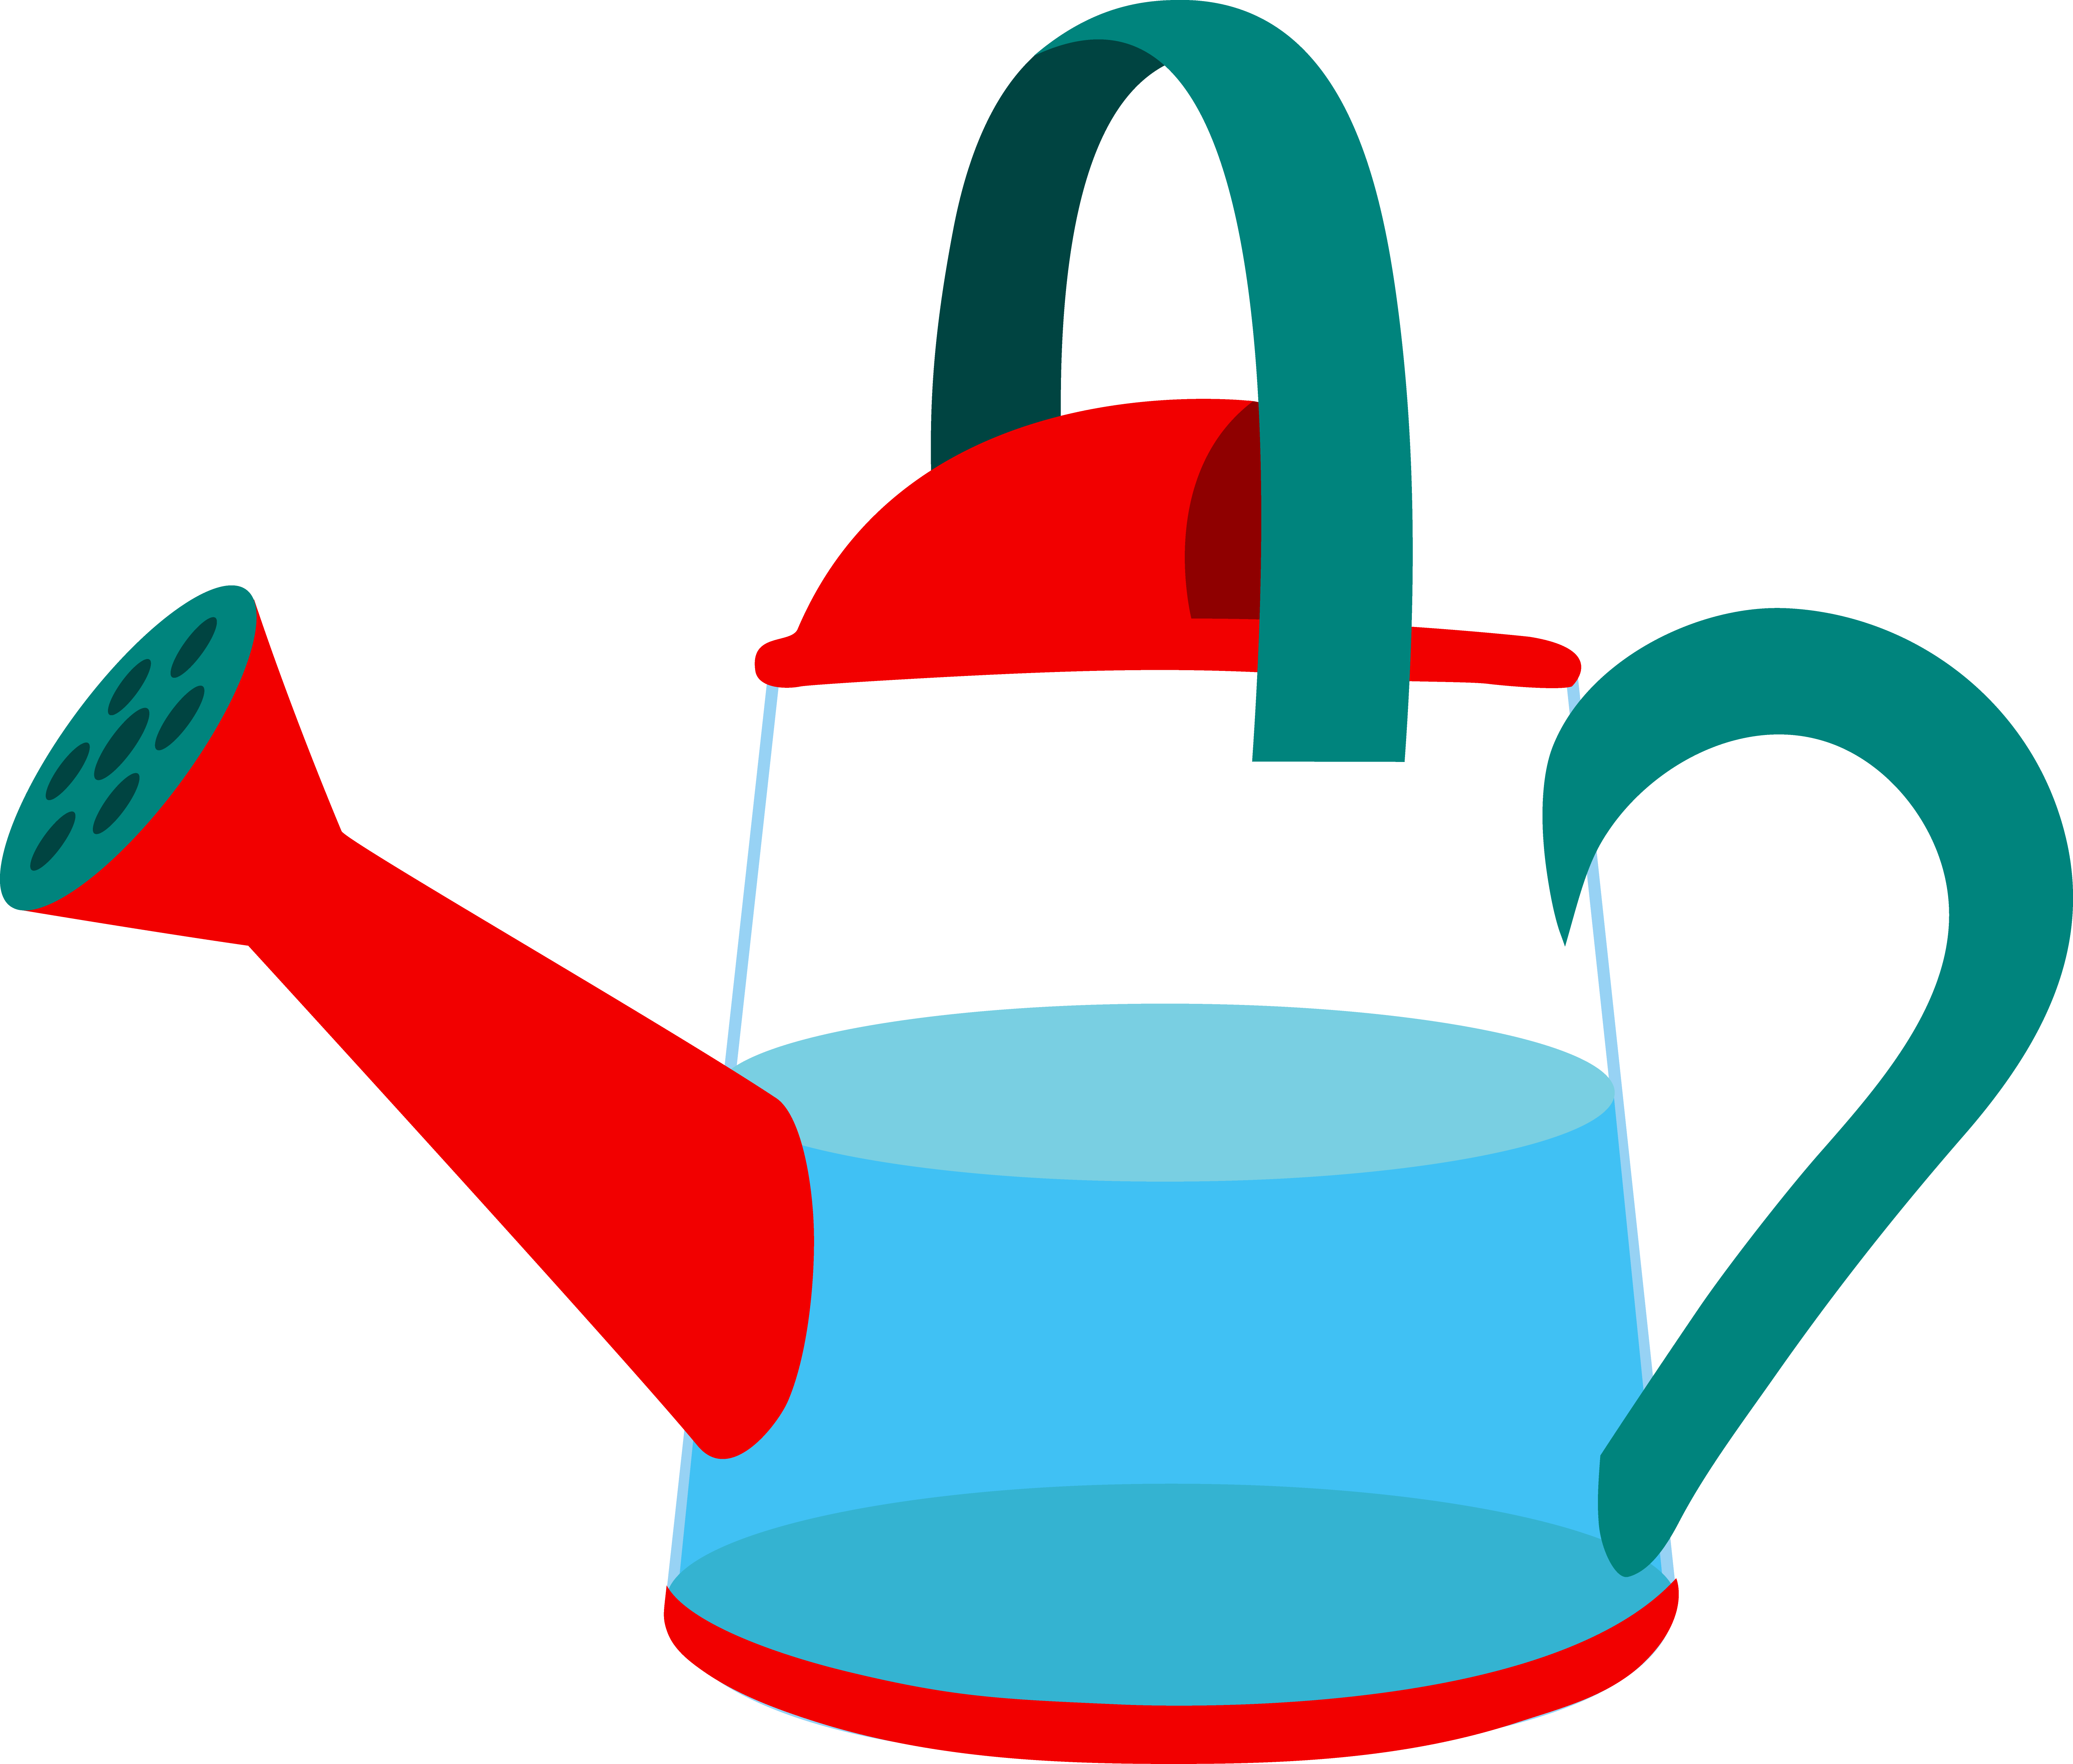 Cartoon Watering Can | Free Download Clip Art | Free Clip Art | on ...